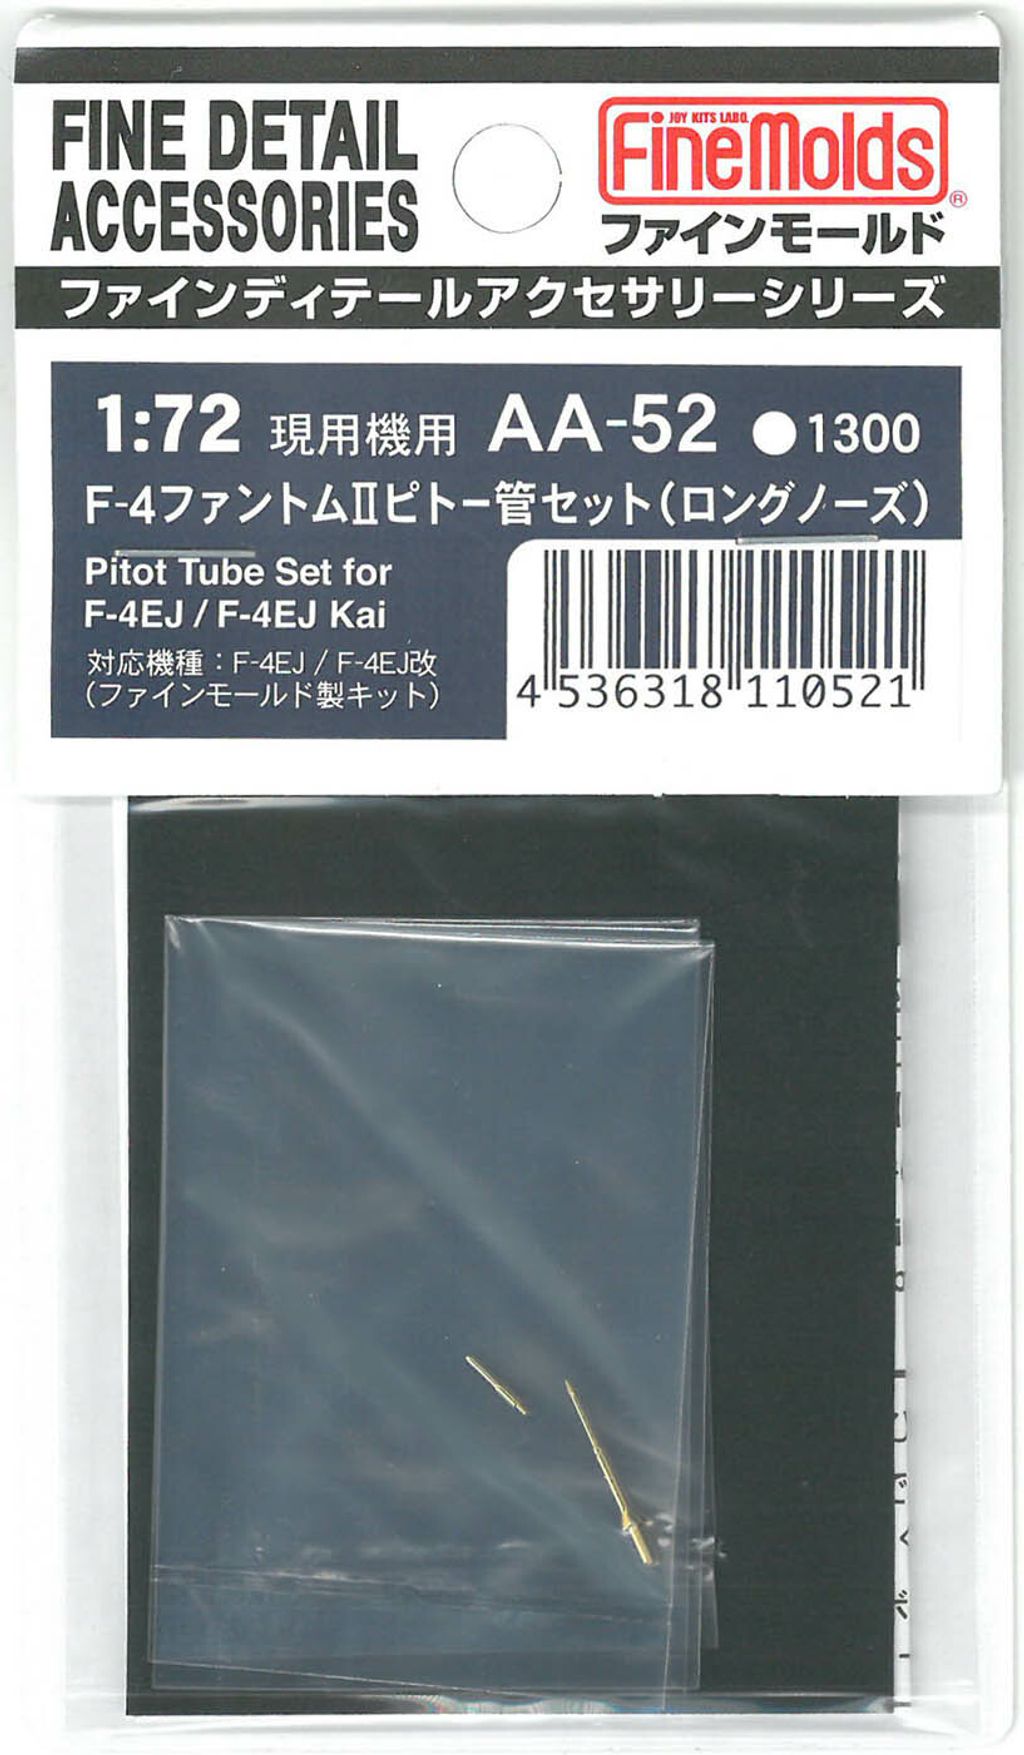 AA52 FM Pitot tubes for F-4EJ and EJ Kai_1.jpg